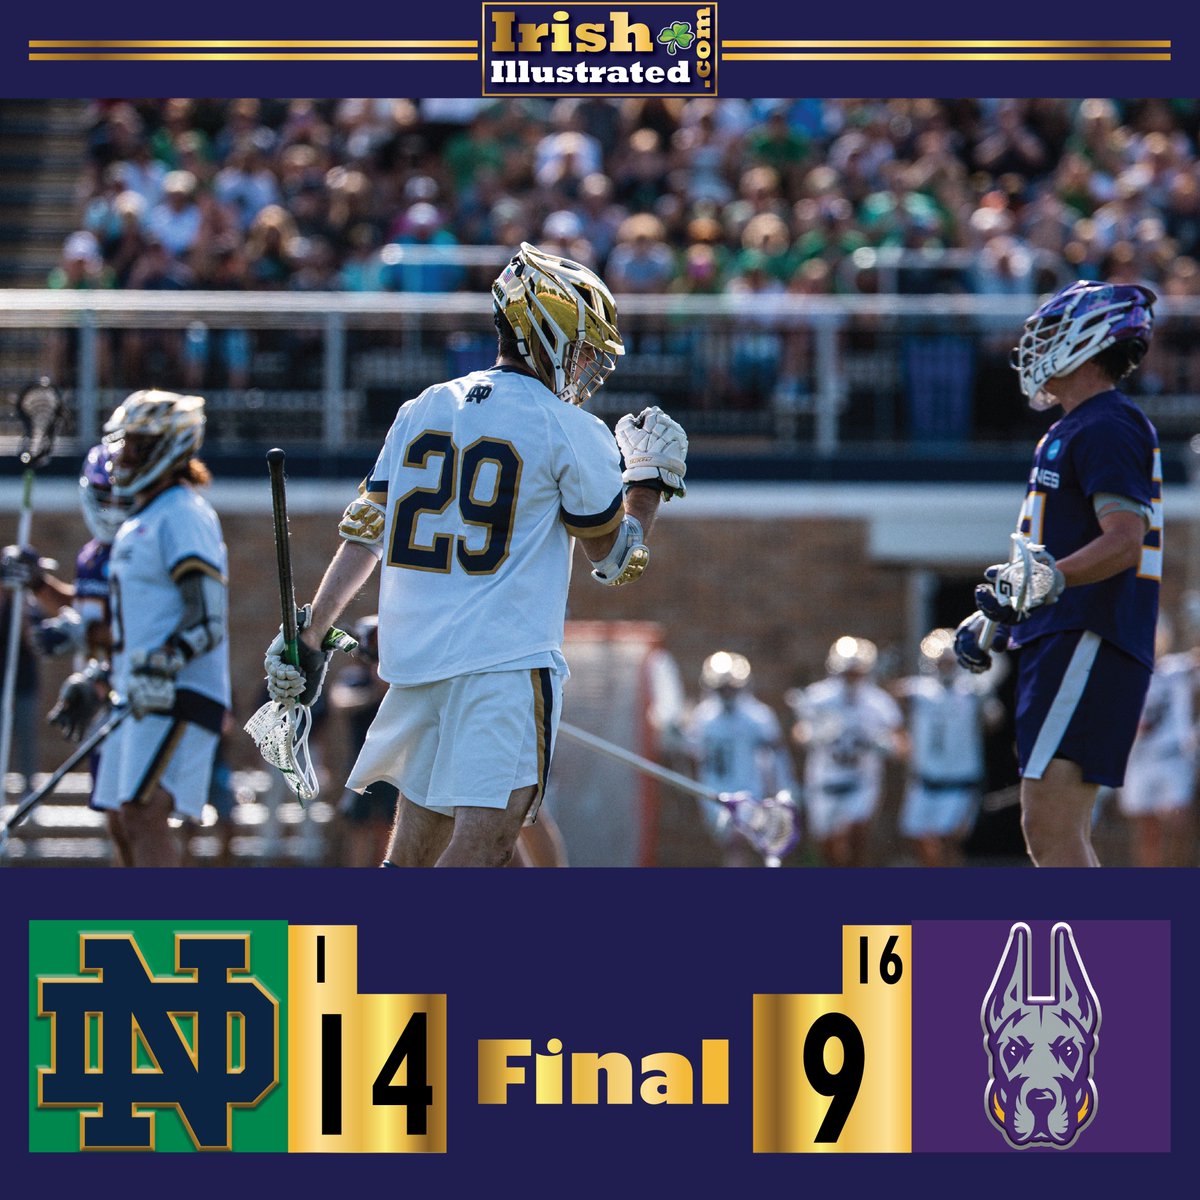 It was a nail-biter in the first half as @NDlacrosse trailed 5-4, but the Irish got it done in the third quarter and completed the comeback to advance to the NCAA Quarterfinals.
📸: @NDlacrosse